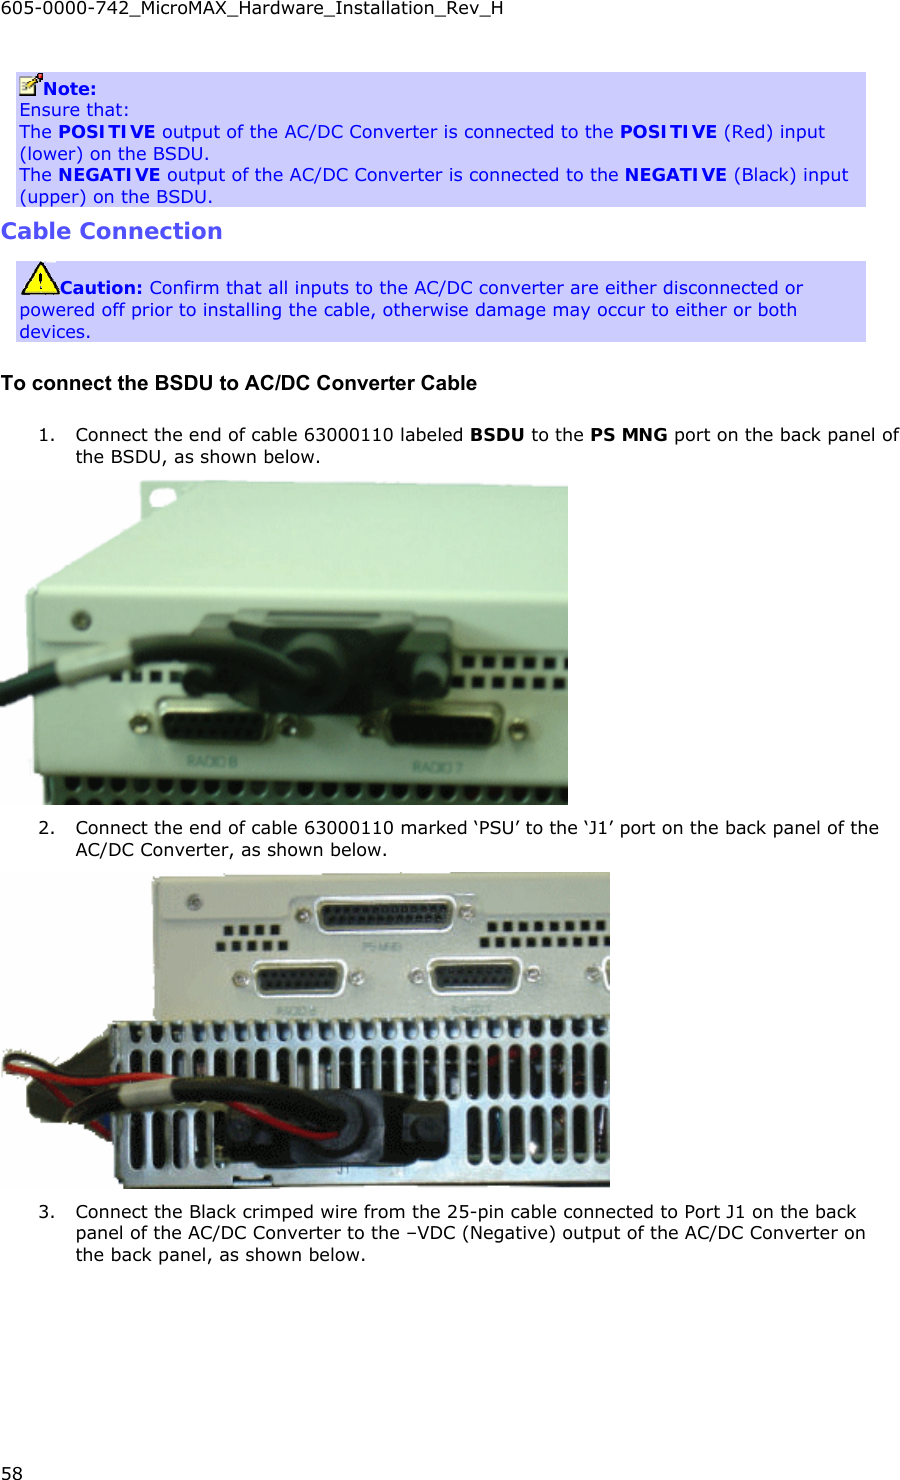 605-0000-742_MicroMAX_Hardware_Installation_Rev_H 58    Note:  Ensure that: The POSITIVE output of the AC/DC Converter is connected to the POSITIVE (Red) input (lower) on the BSDU. The NEGATIVE output of the AC/DC Converter is connected to the NEGATIVE (Black) input (upper) on the BSDU. Cable Connection Caution: Confirm that all inputs to the AC/DC converter are either disconnected or powered off prior to installing the cable, otherwise damage may occur to either or both devices. To connect the BSDU to AC/DC Converter Cable 1. Connect the end of cable 63000110 labeled BSDU to the PS MNG port on the back panel of the BSDU, as shown below.  2. Connect the end of cable 63000110 marked ‘PSU’ to the ‘J1’ port on the back panel of the AC/DC Converter, as shown below.  3. Connect the Black crimped wire from the 25-pin cable connected to Port J1 on the back panel of the AC/DC Converter to the –VDC (Negative) output of the AC/DC Converter on the back panel, as shown below. 